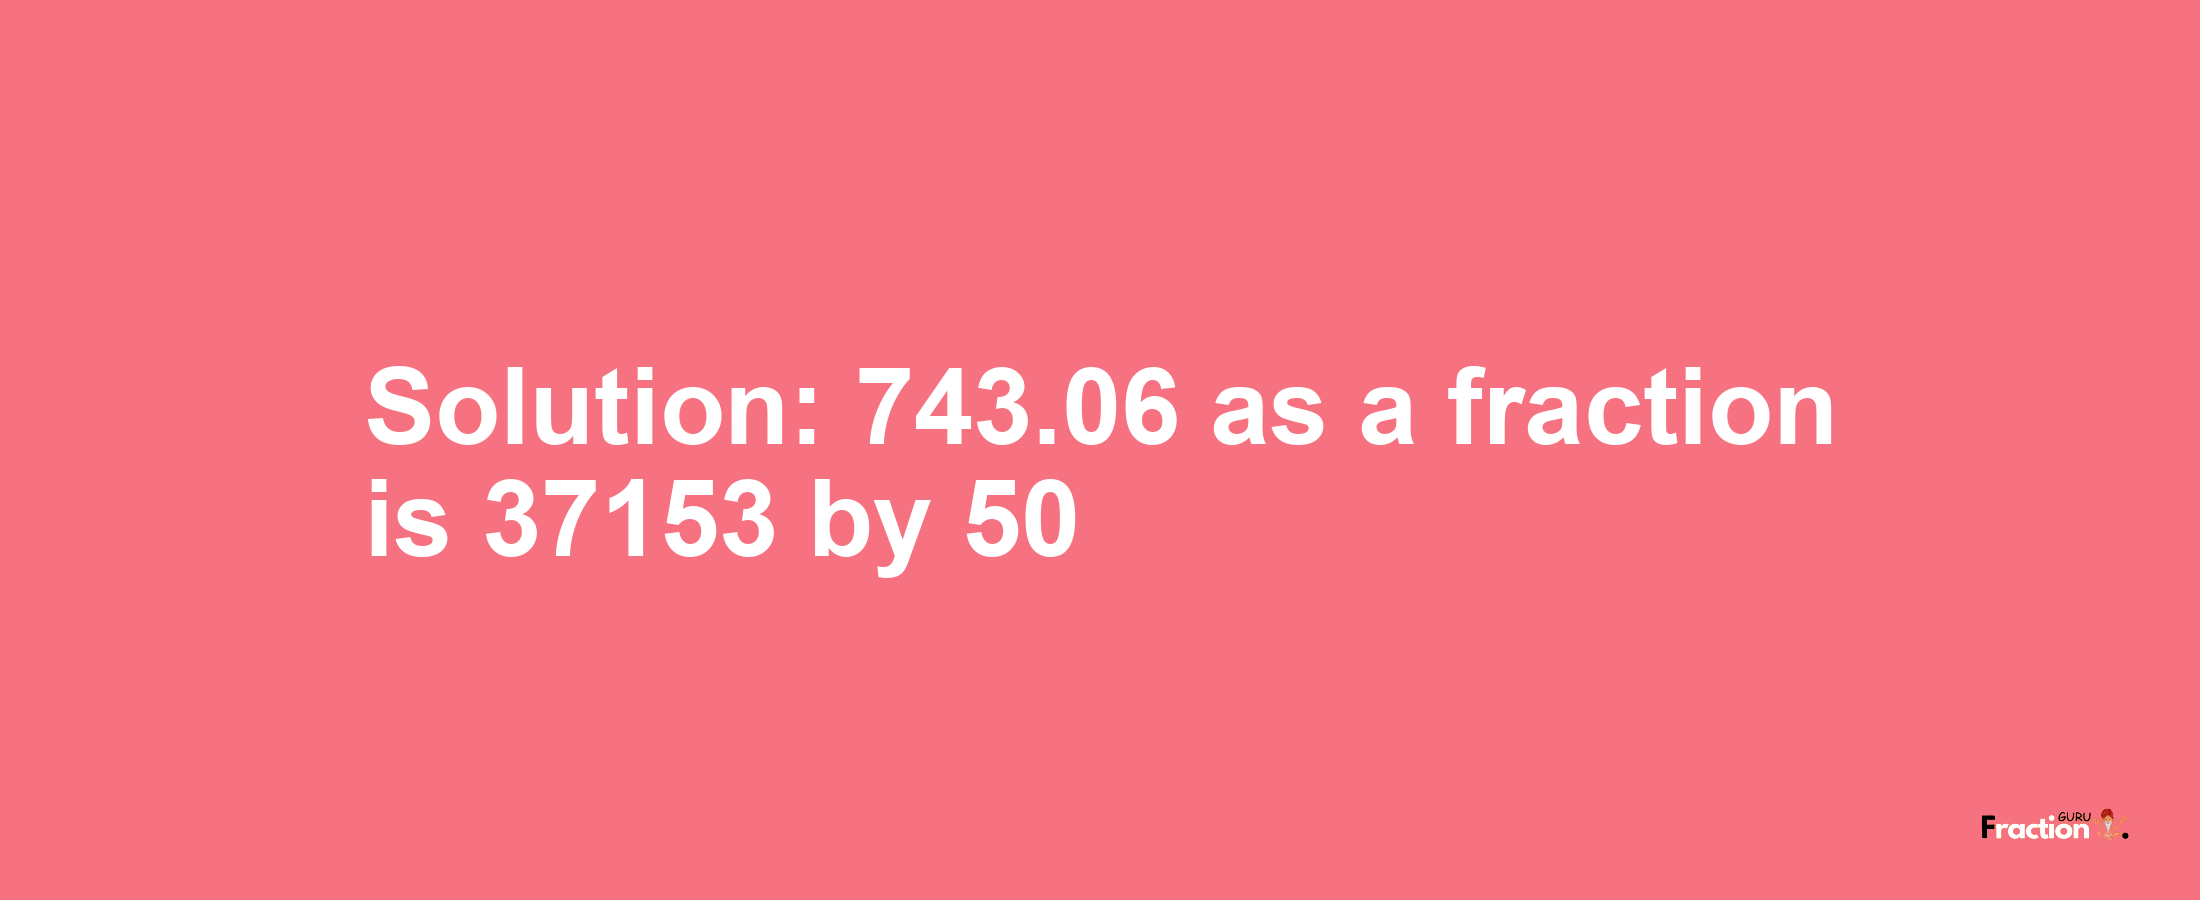 Solution:743.06 as a fraction is 37153/50